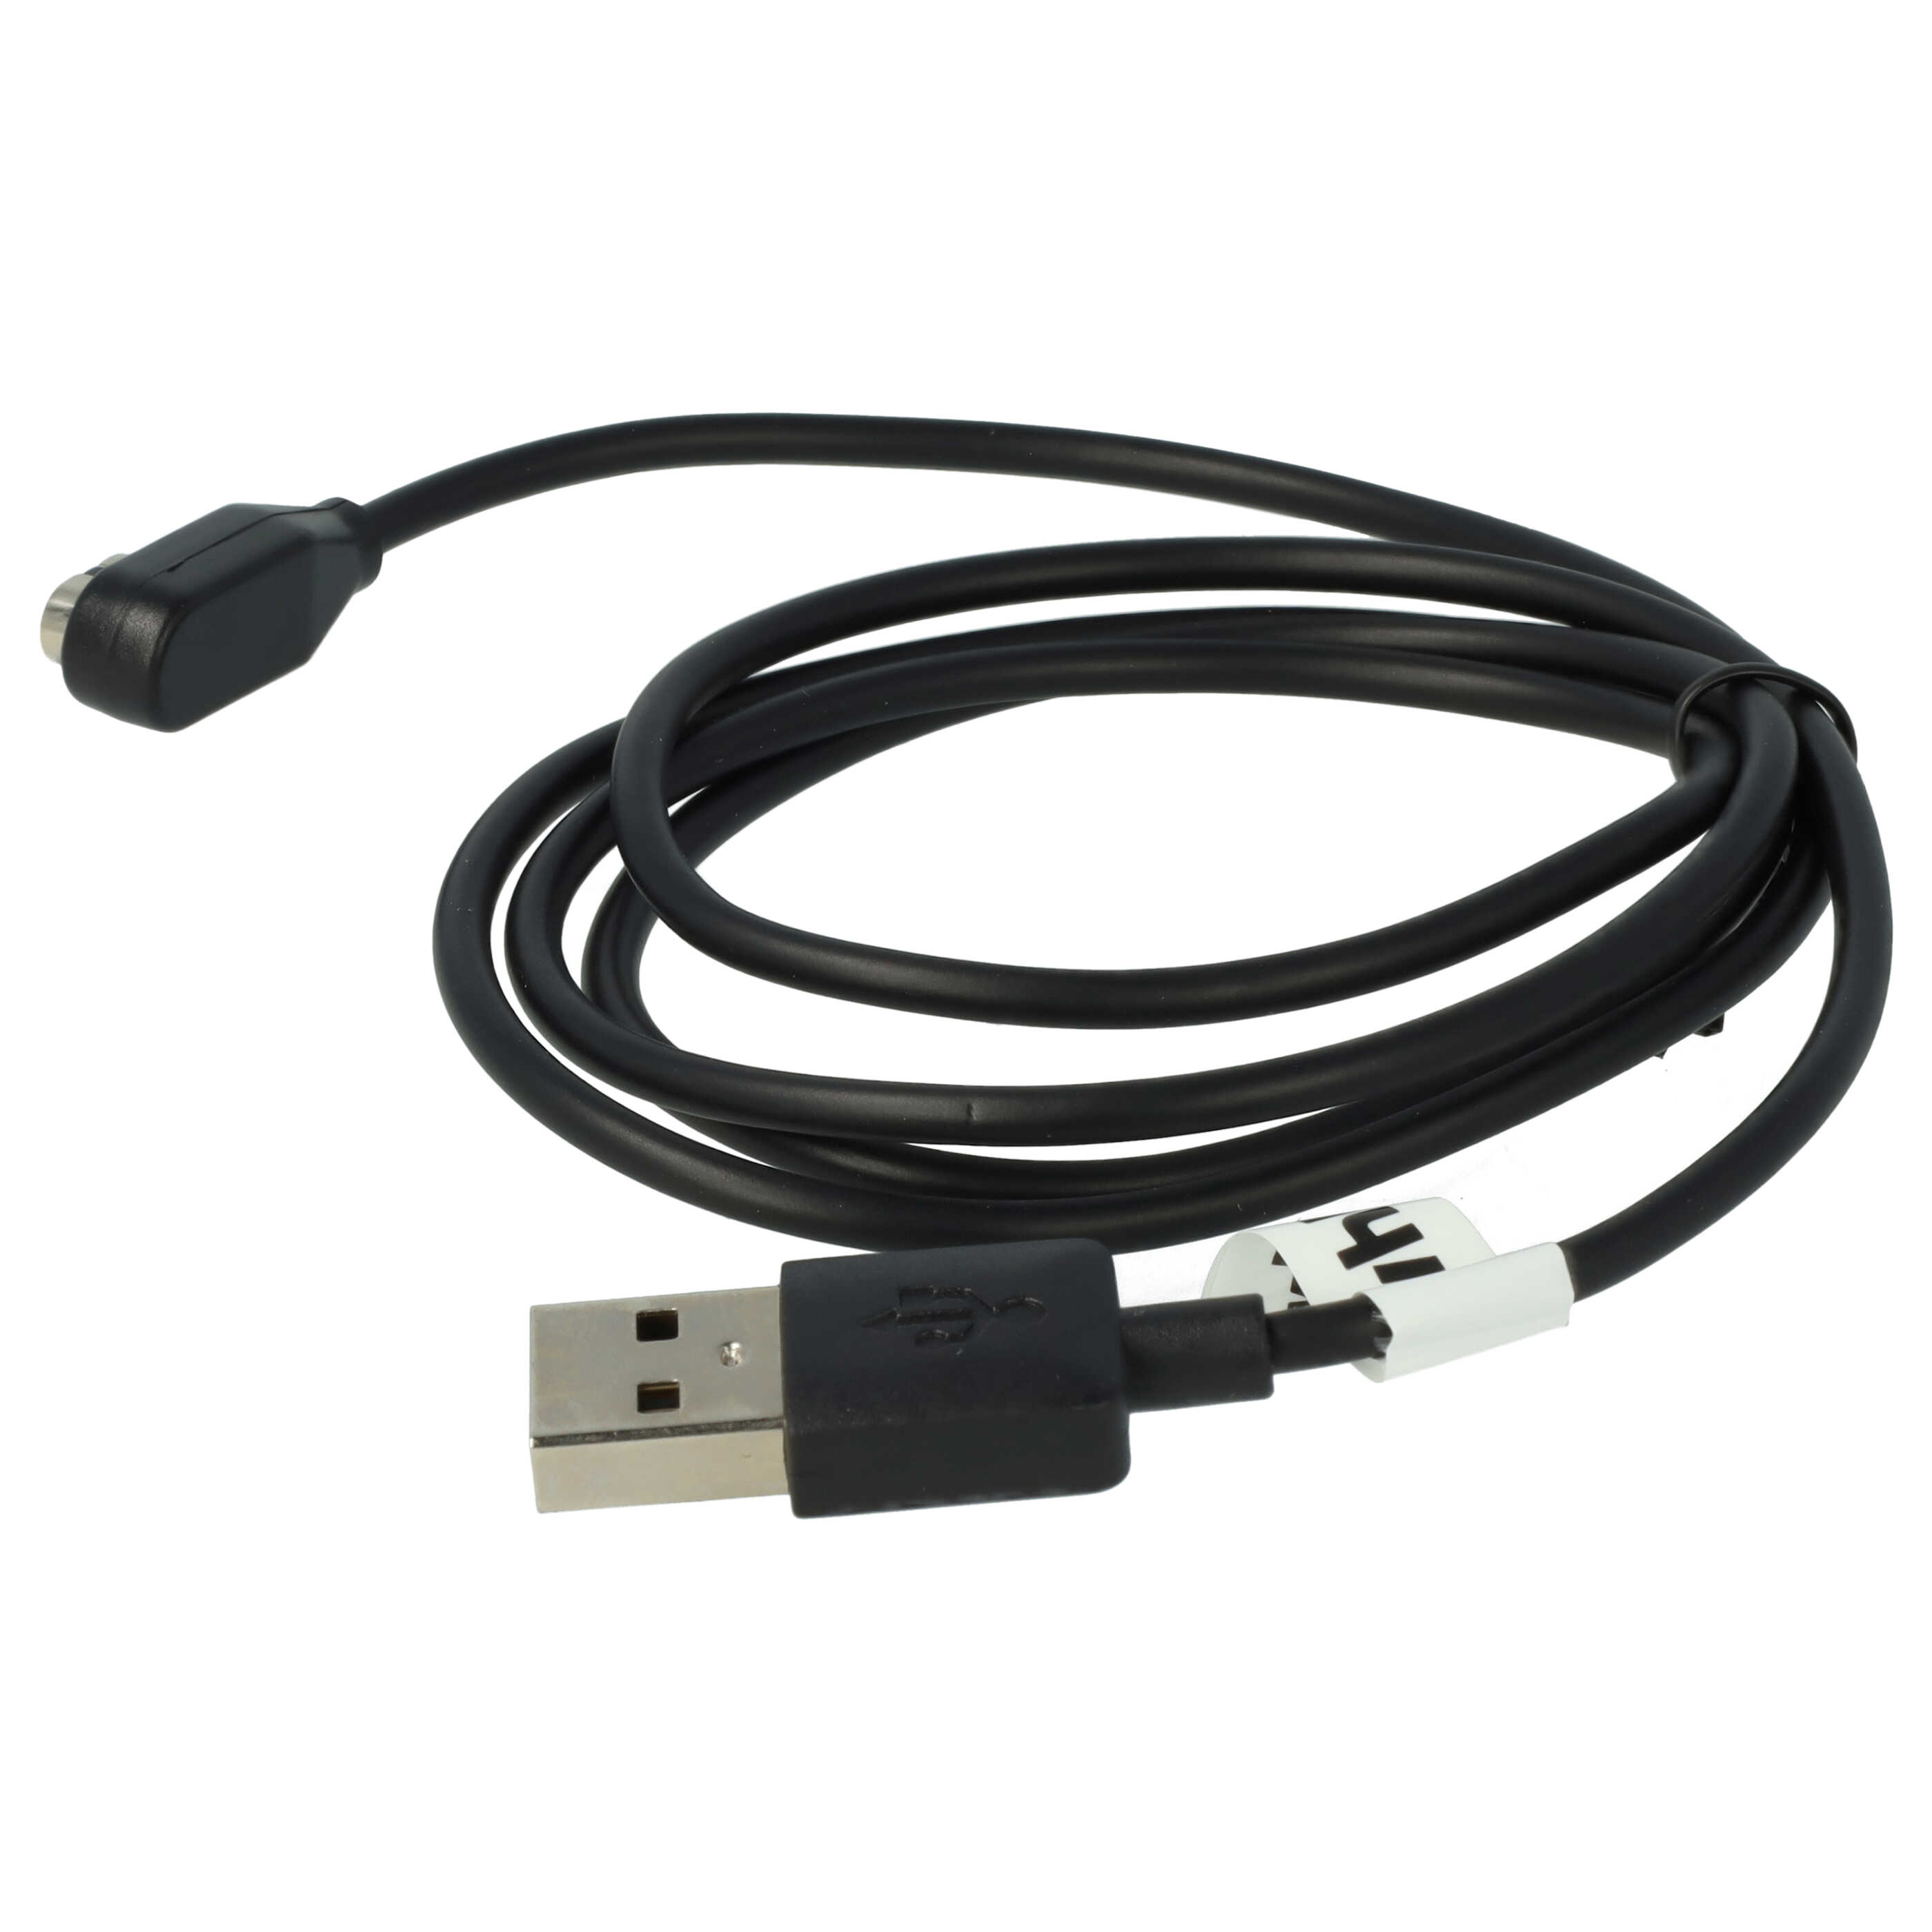 USB Charging Cable to 2.5 mm Audio Jack as Replacement for Aftershokz Aeropex Headphones etc., Black